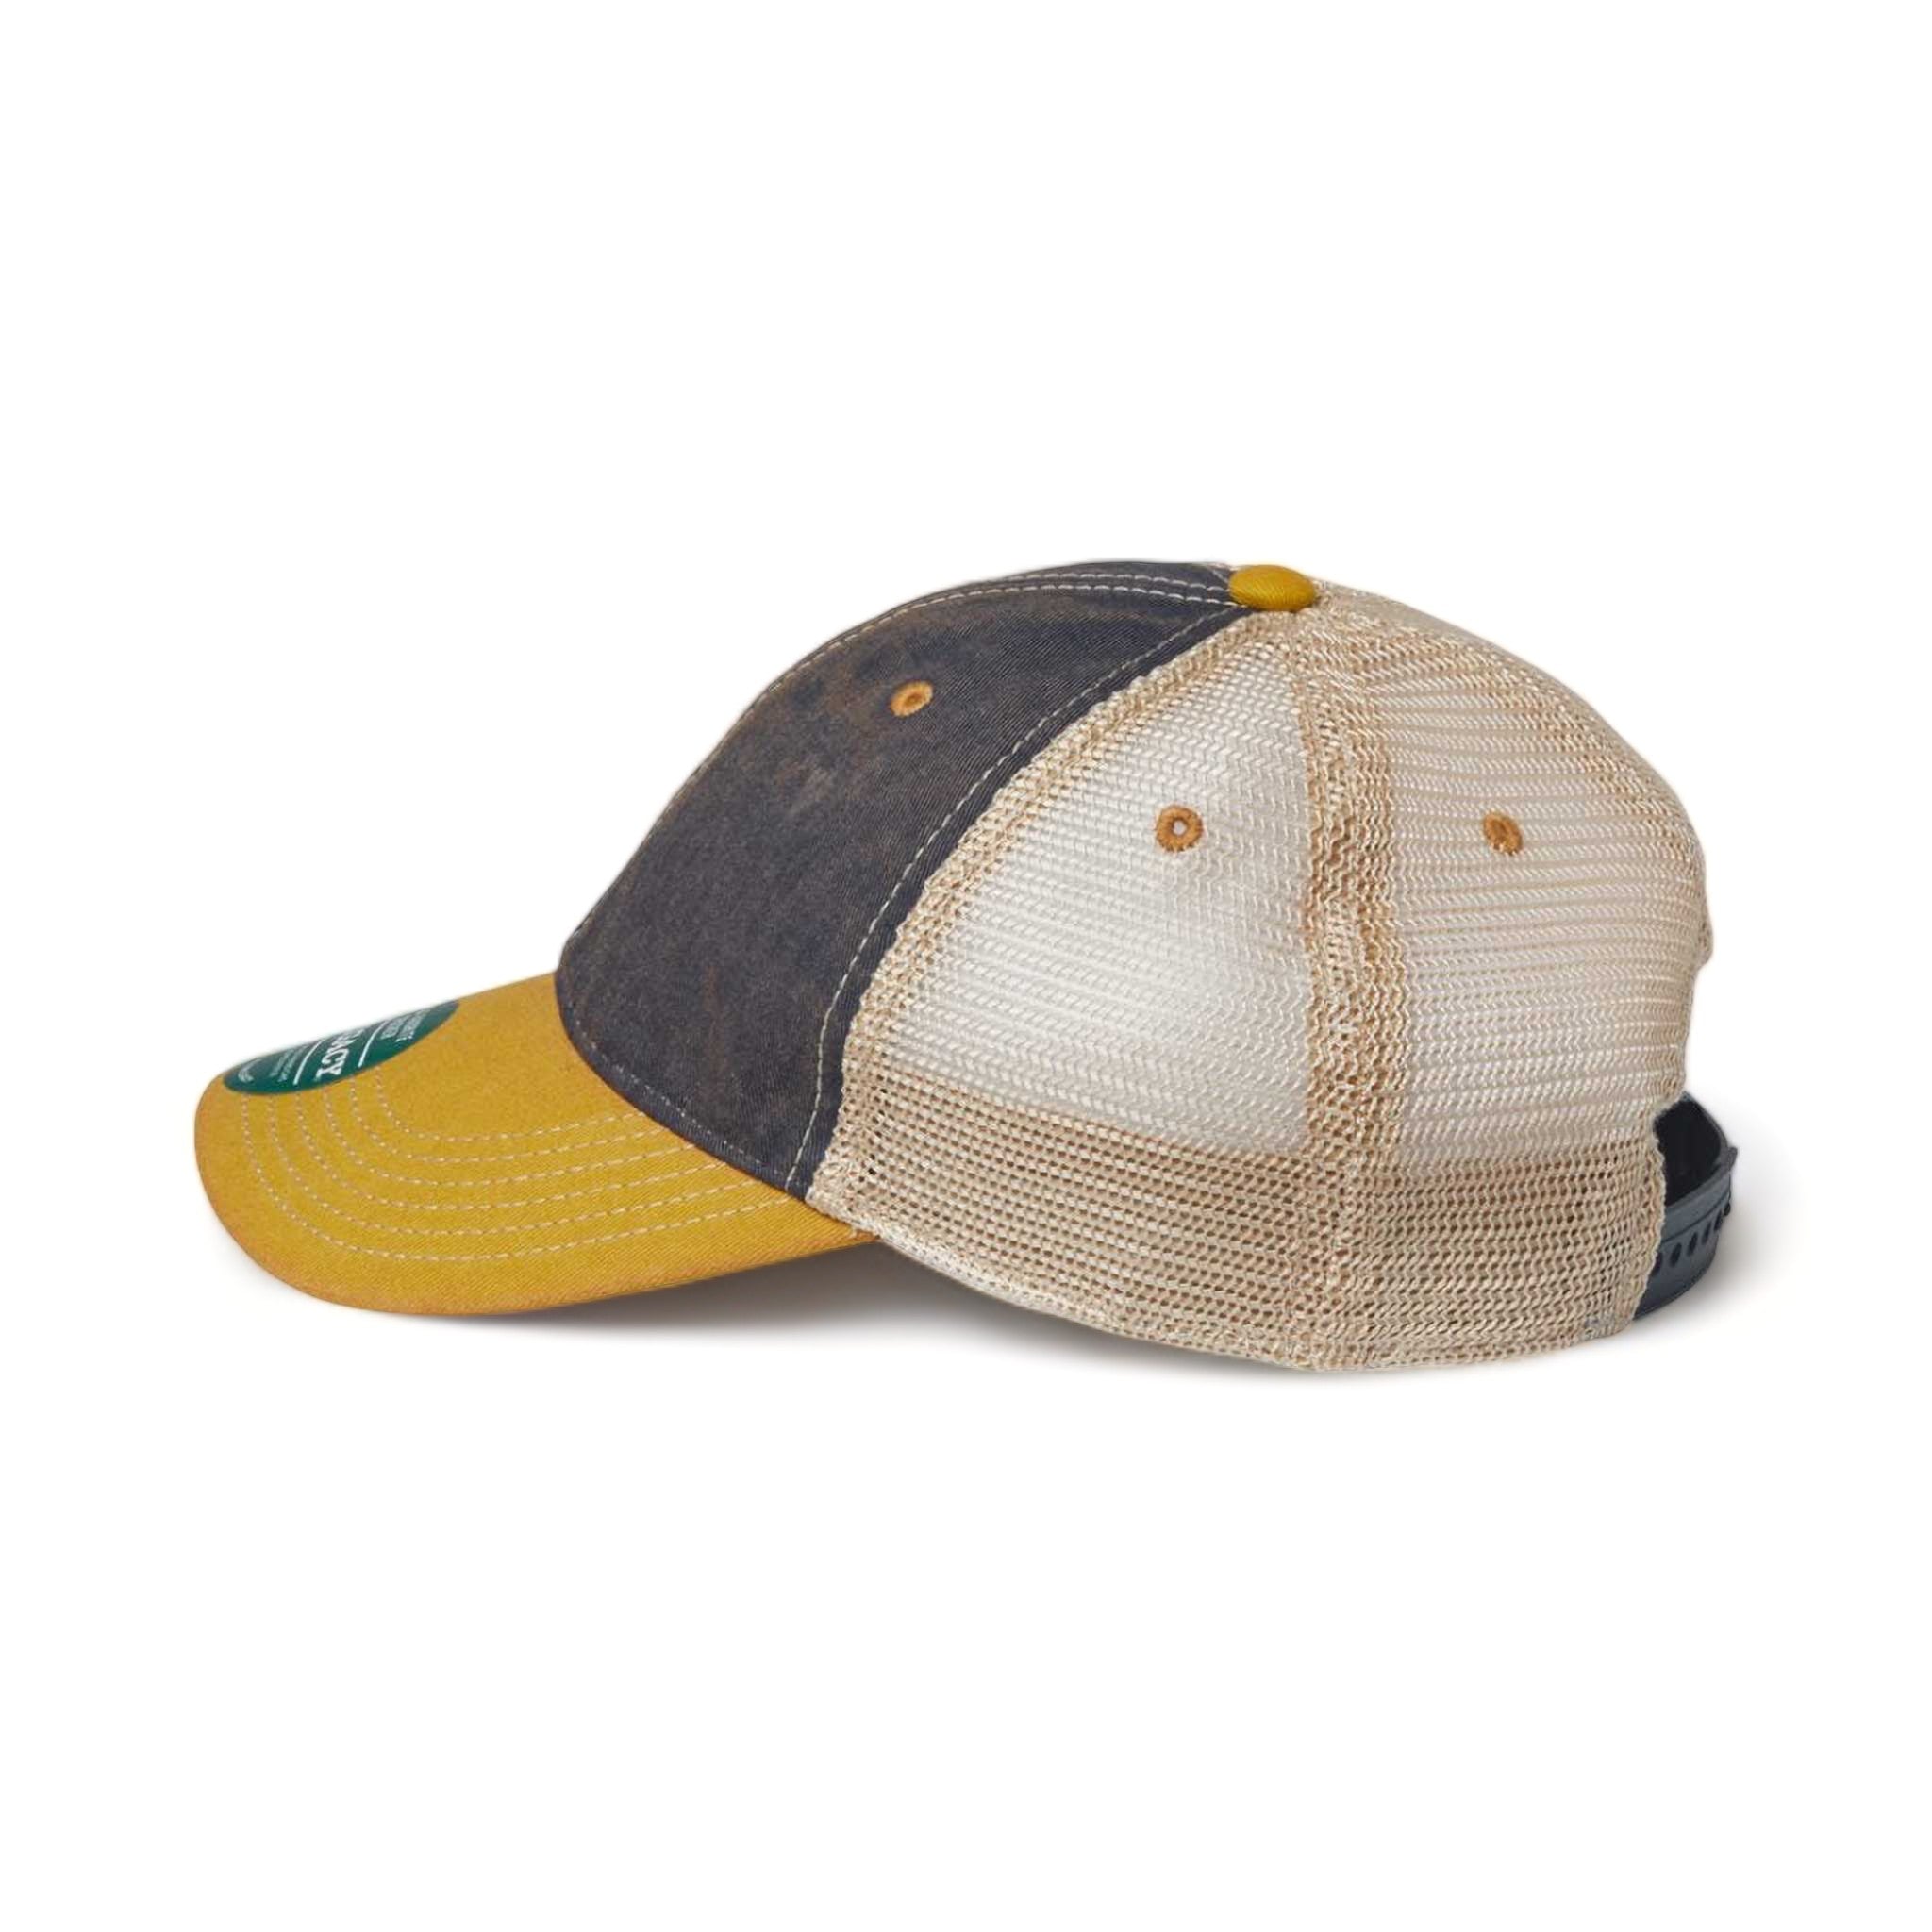 Side view of LEGACY OFA custom hat in navy, yellow and khaki